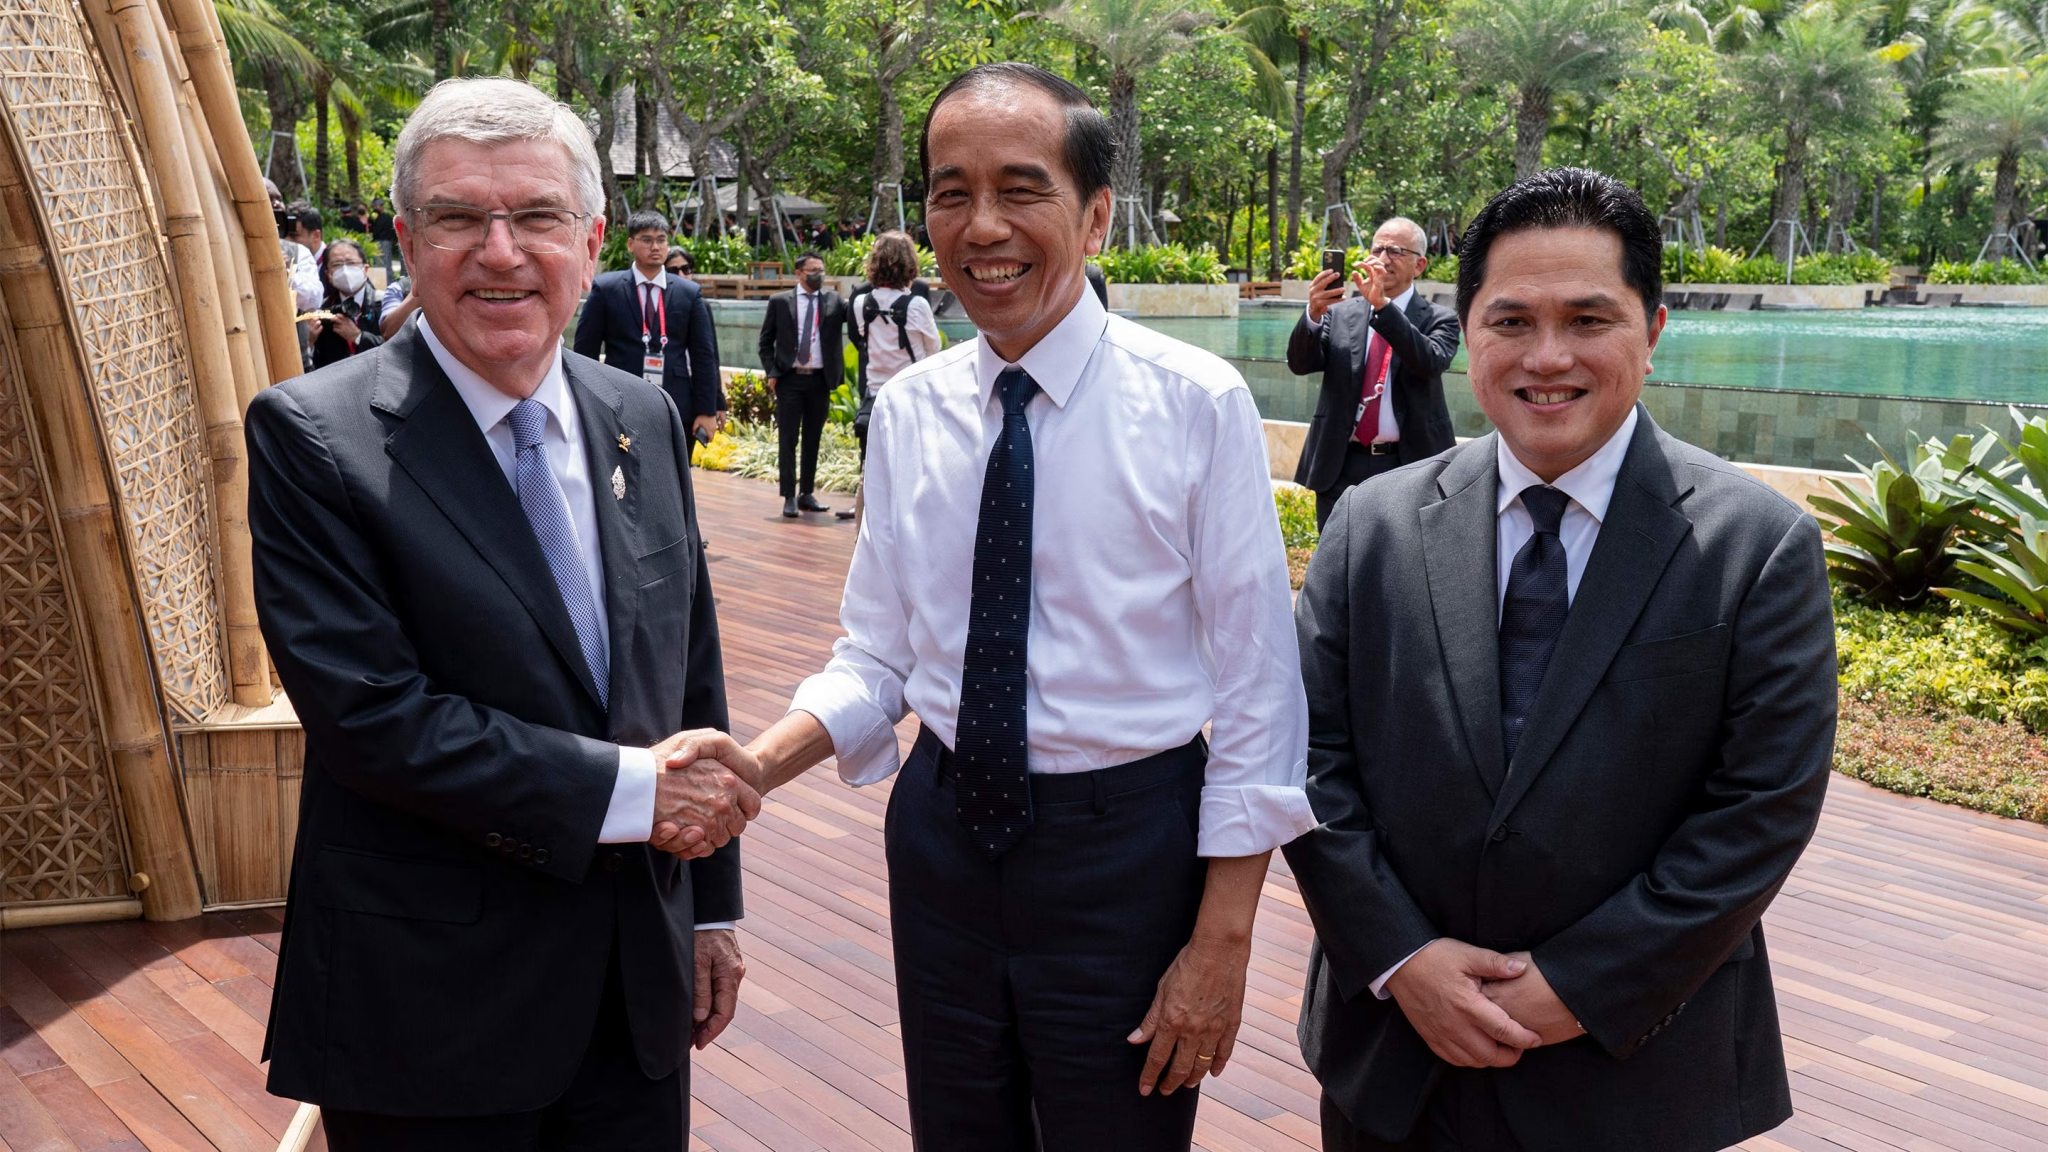 IOC President Thomas Bach, left, had warmly welcomed a bid from Indonesia for the 2036 Olympics announced last November by the country's leader Joko “Jokowi” Widodo ©IOC 